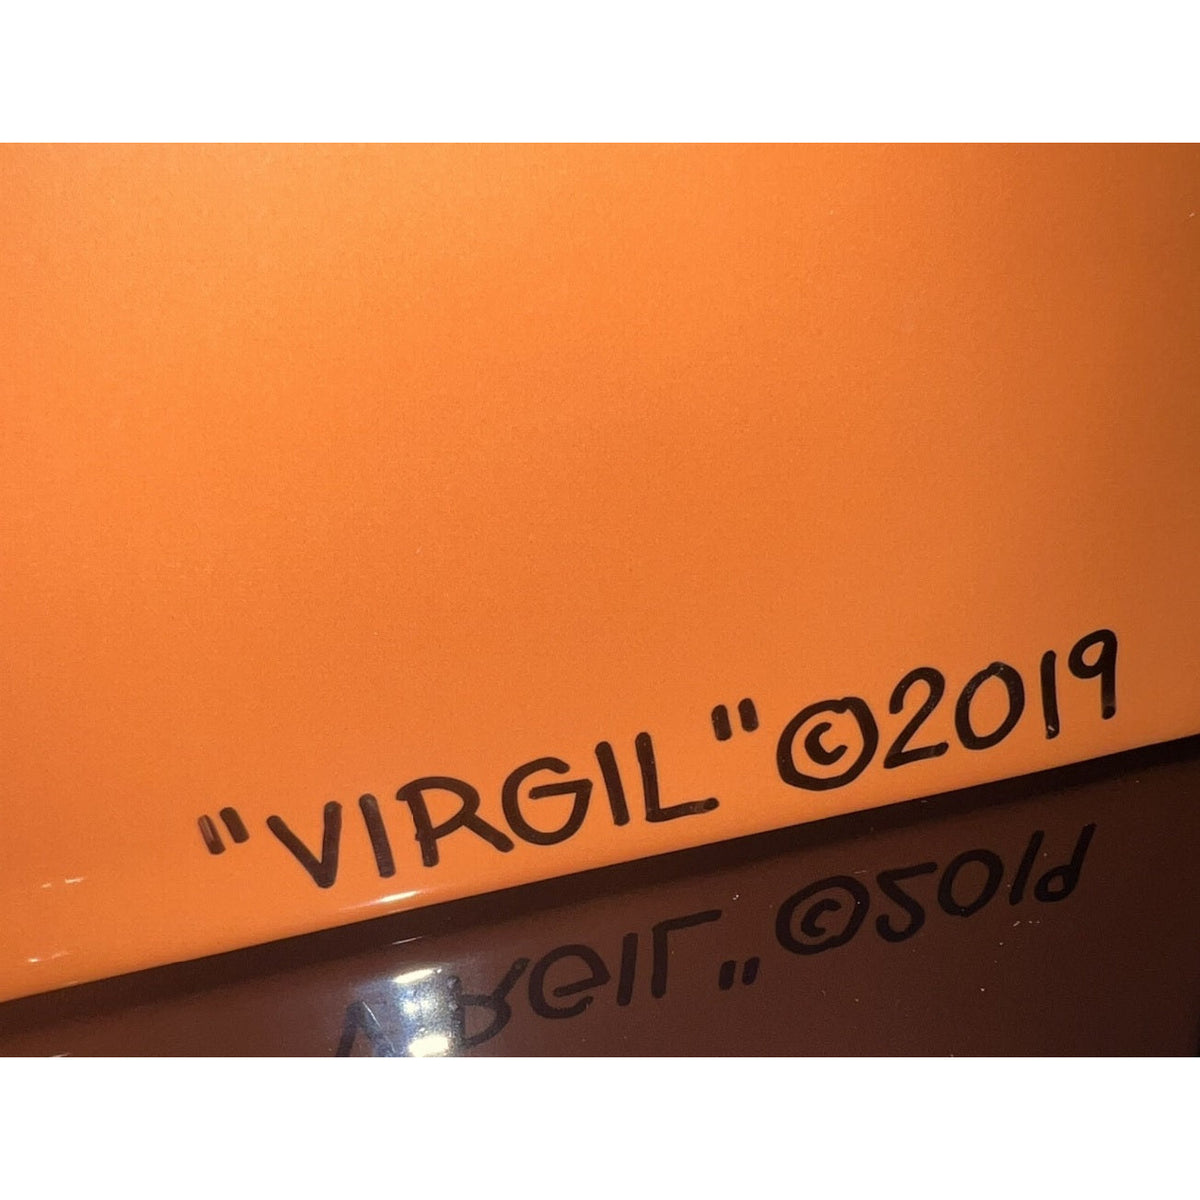 Signed By Virgil Abloh… How Much Are These Worth? 😳💰 